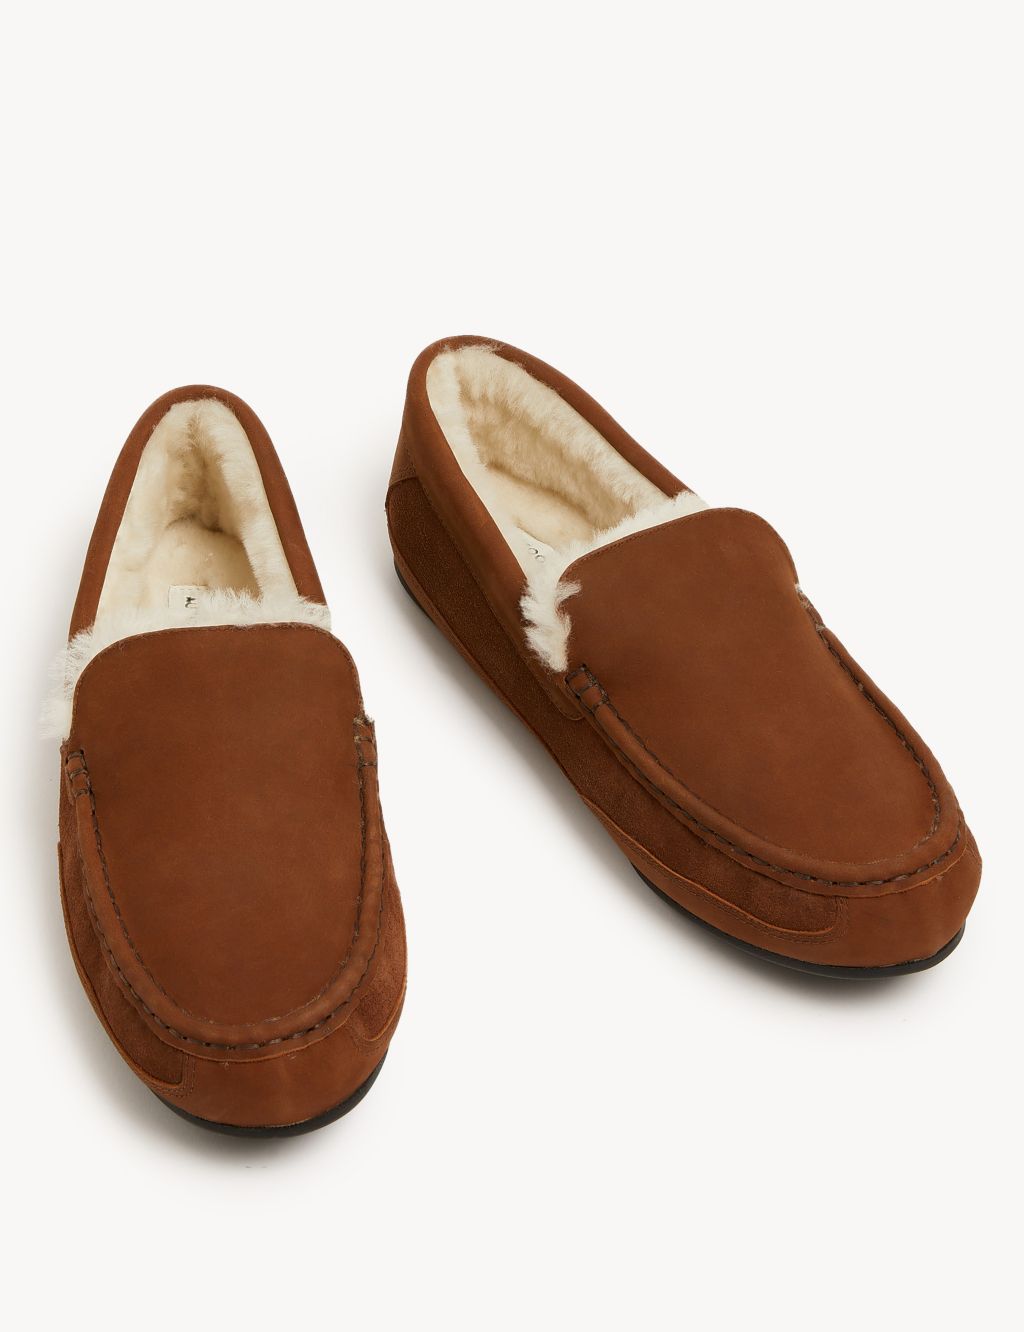 Suede Moccasin Slippers with Freshfeet™ image 2